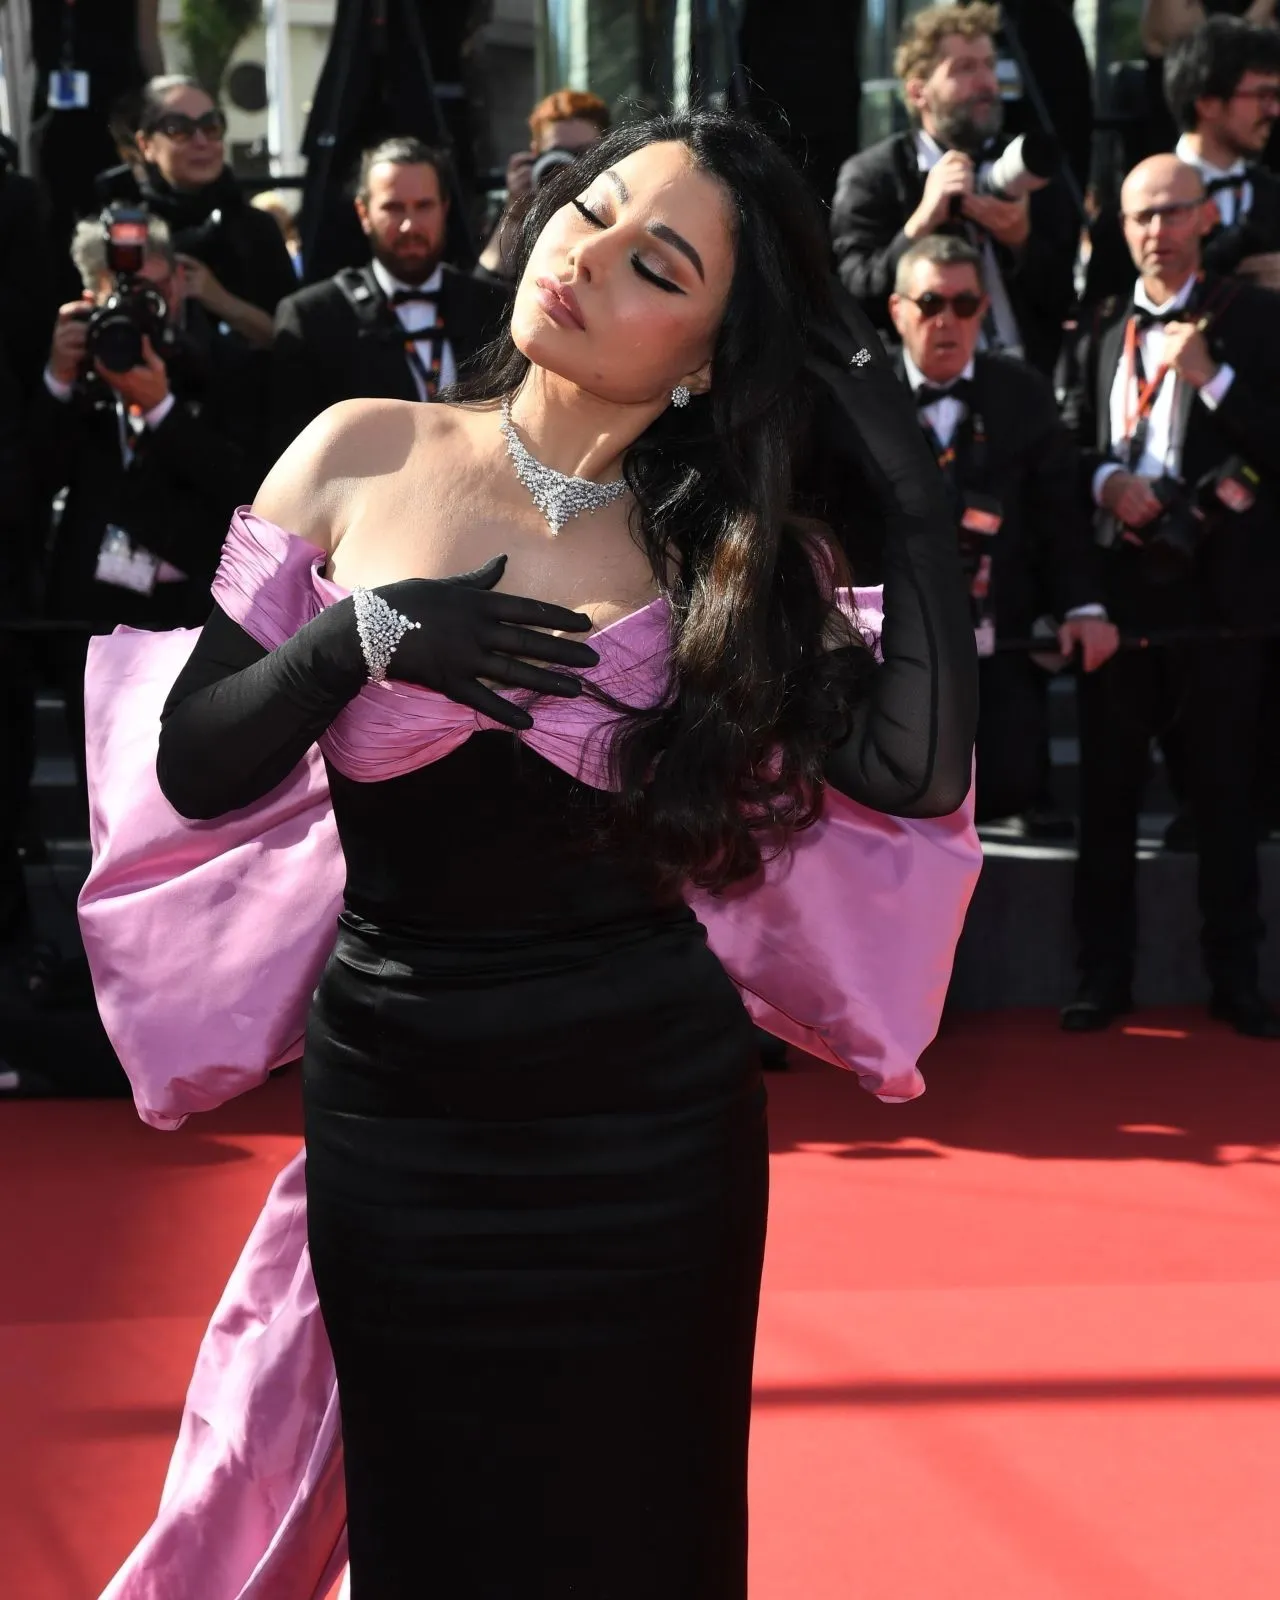 HAIFA WEHBE AT THE COUNT OF MONTE CRISTO PREMIERE AT CANNES FILM FESTIVAL5